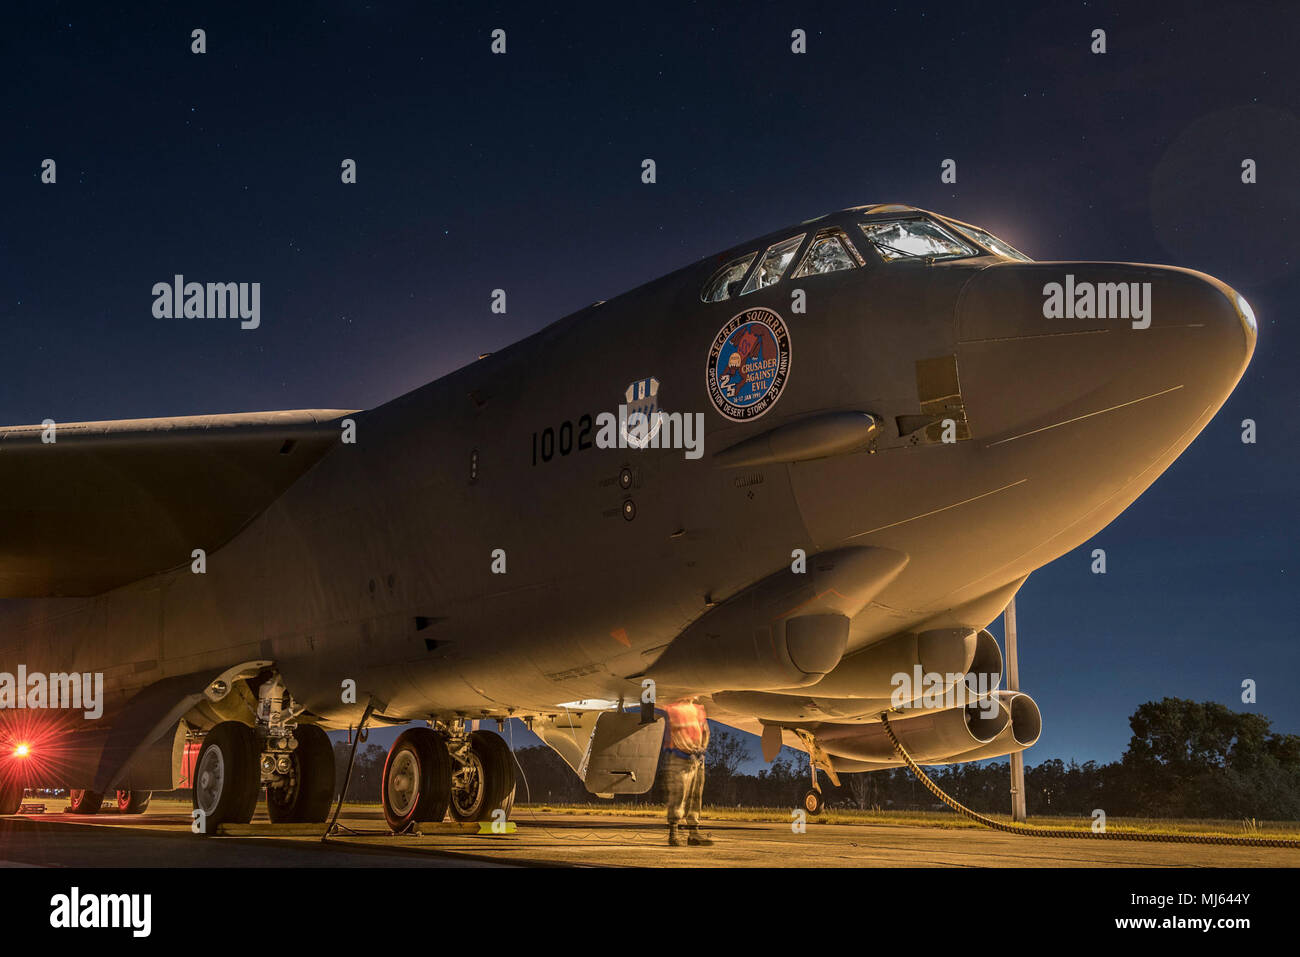 A crew chief assigned to the 20th Expeditionary Aircraft Maintenance Unit and preflight aircrew prepare a B-52H Stratofortress for take-off at Royal Australian Air Force (RAAF) Base, Darwin, Australia, April 3, 2018. A detachment of U.S. Air Force B-52H bombers, aircrew and support personnel deployed to RAAF Darwin to enable the U.S. to train and increase interoperability with Australian joint terminal attack controllers as part of the U.S. Force Posture Initiatives’ Enhanced Air Cooperation program, which builds on air exercises and training between the two air forces. The bombers are current Stock Photo